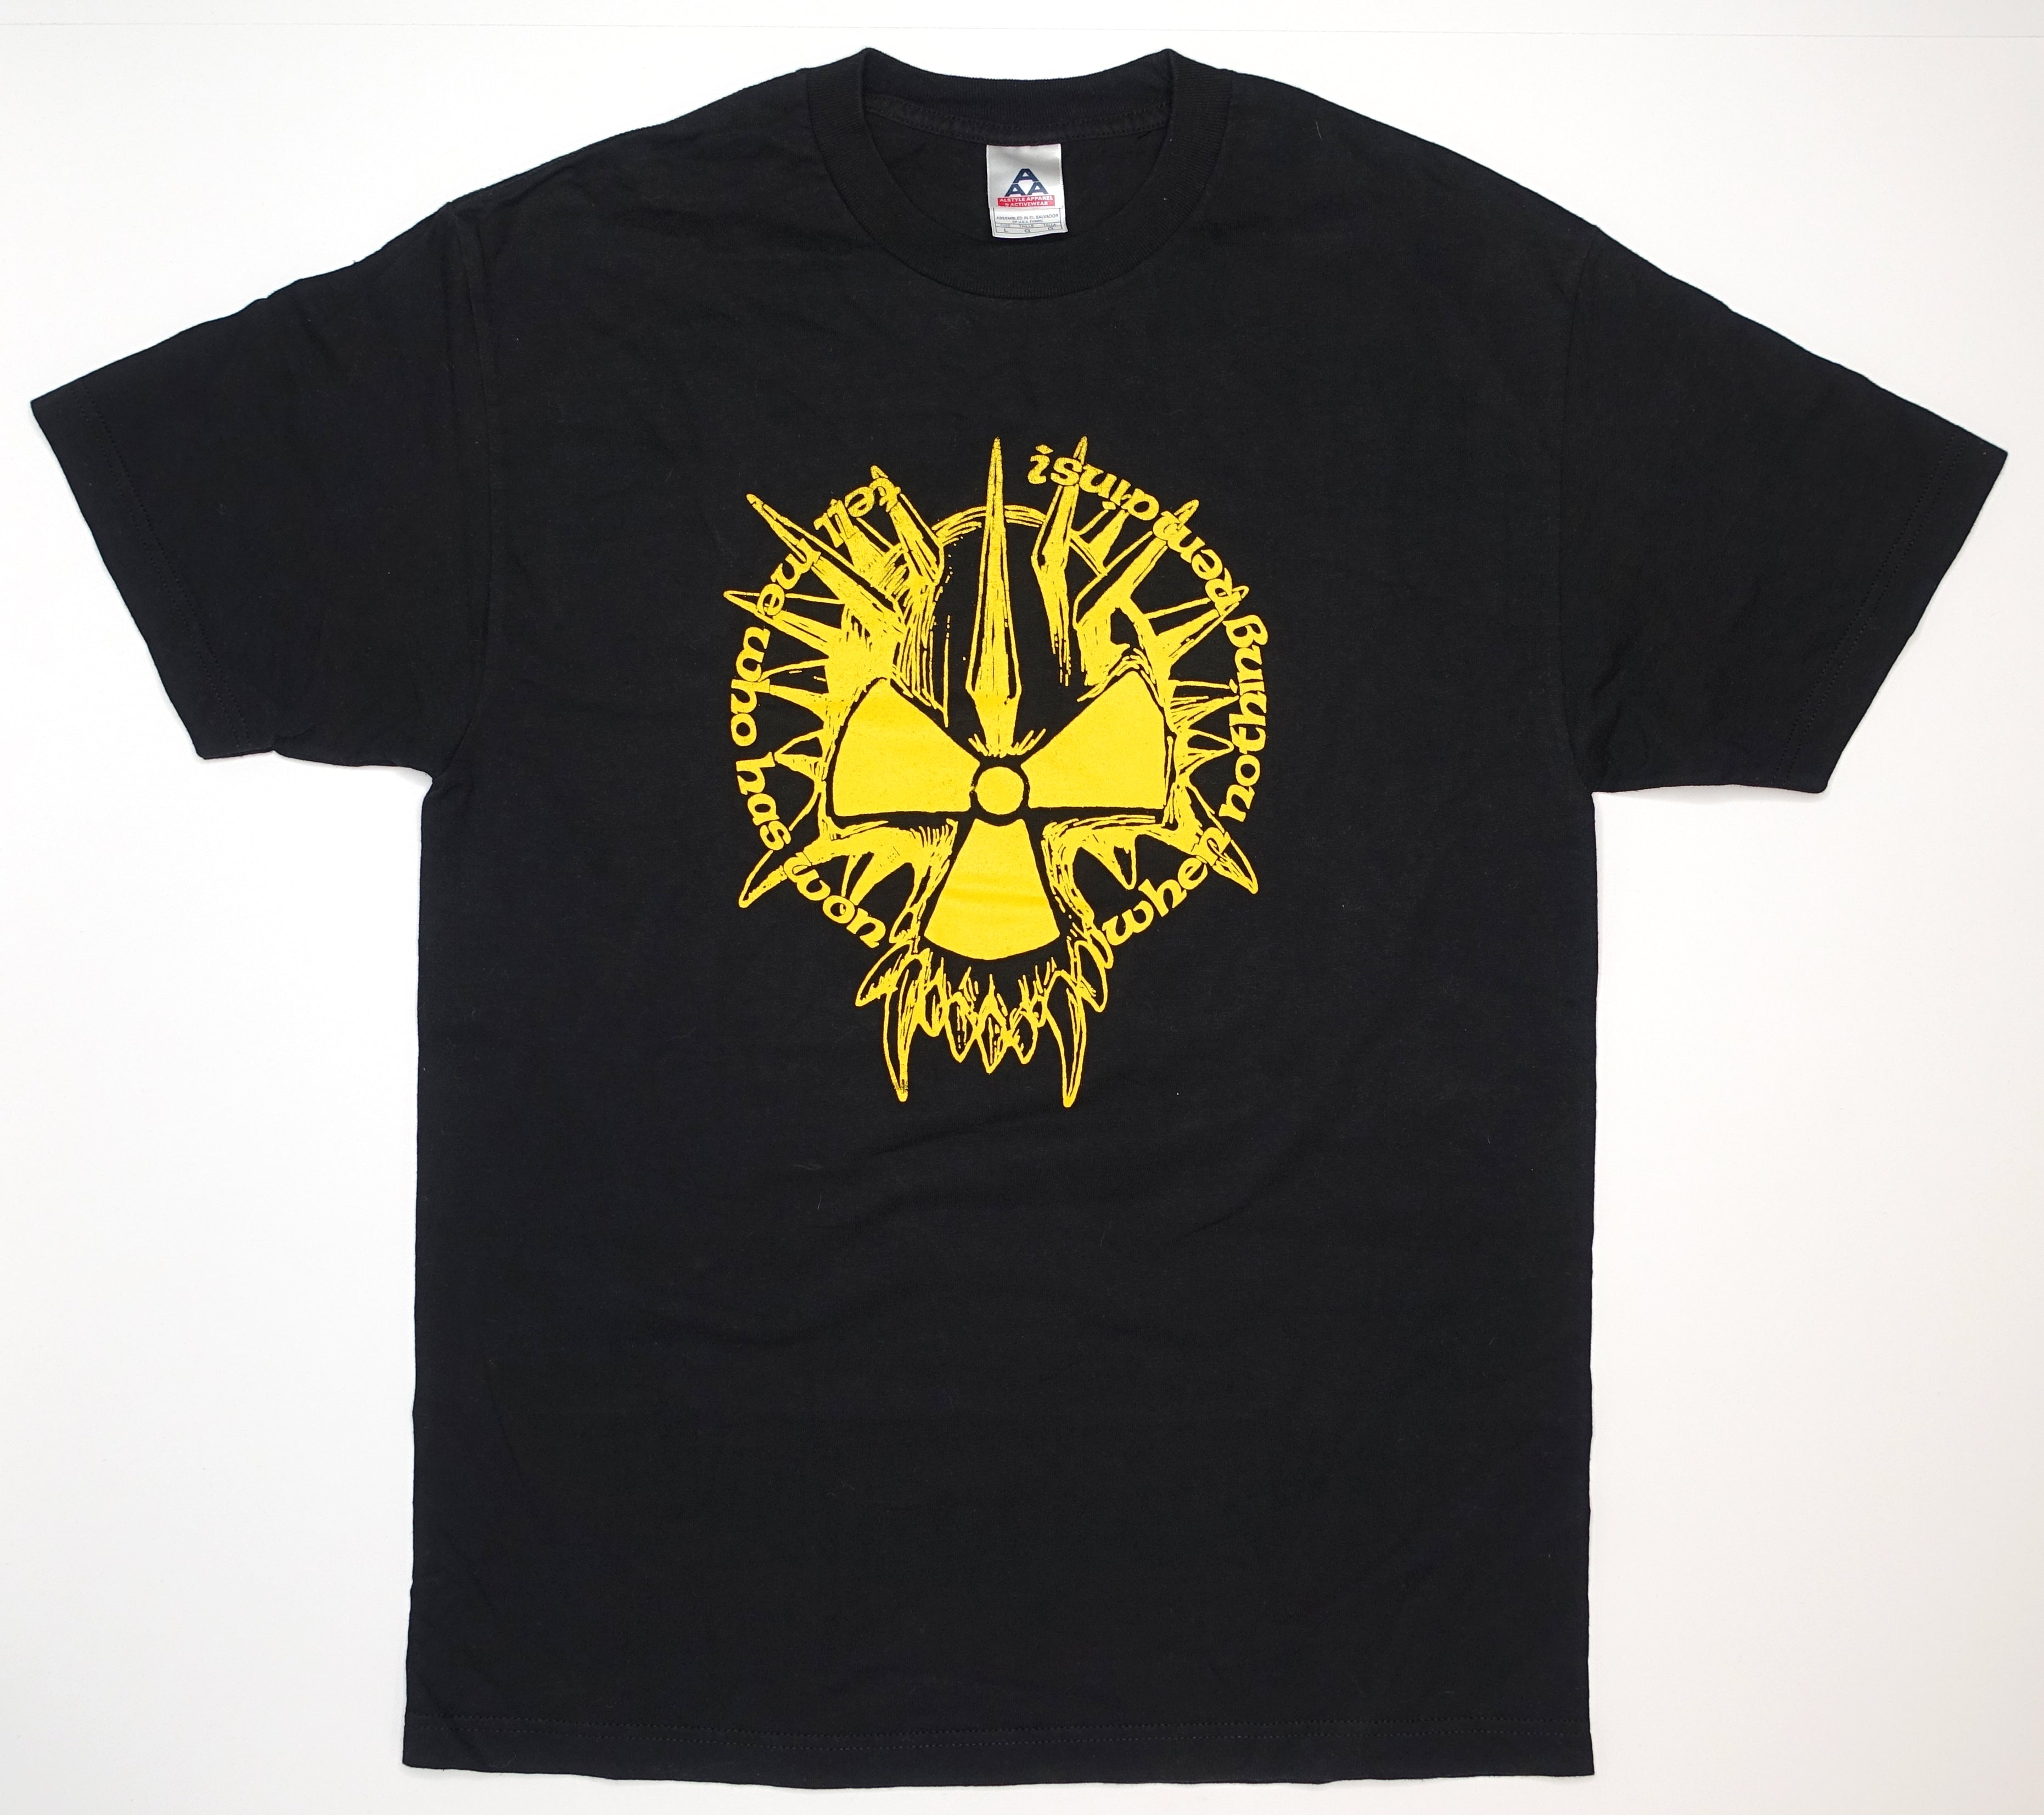 Corrosion Of Conformity – Eye For An Eye 90's Shirt (Bootleg?) Size Large